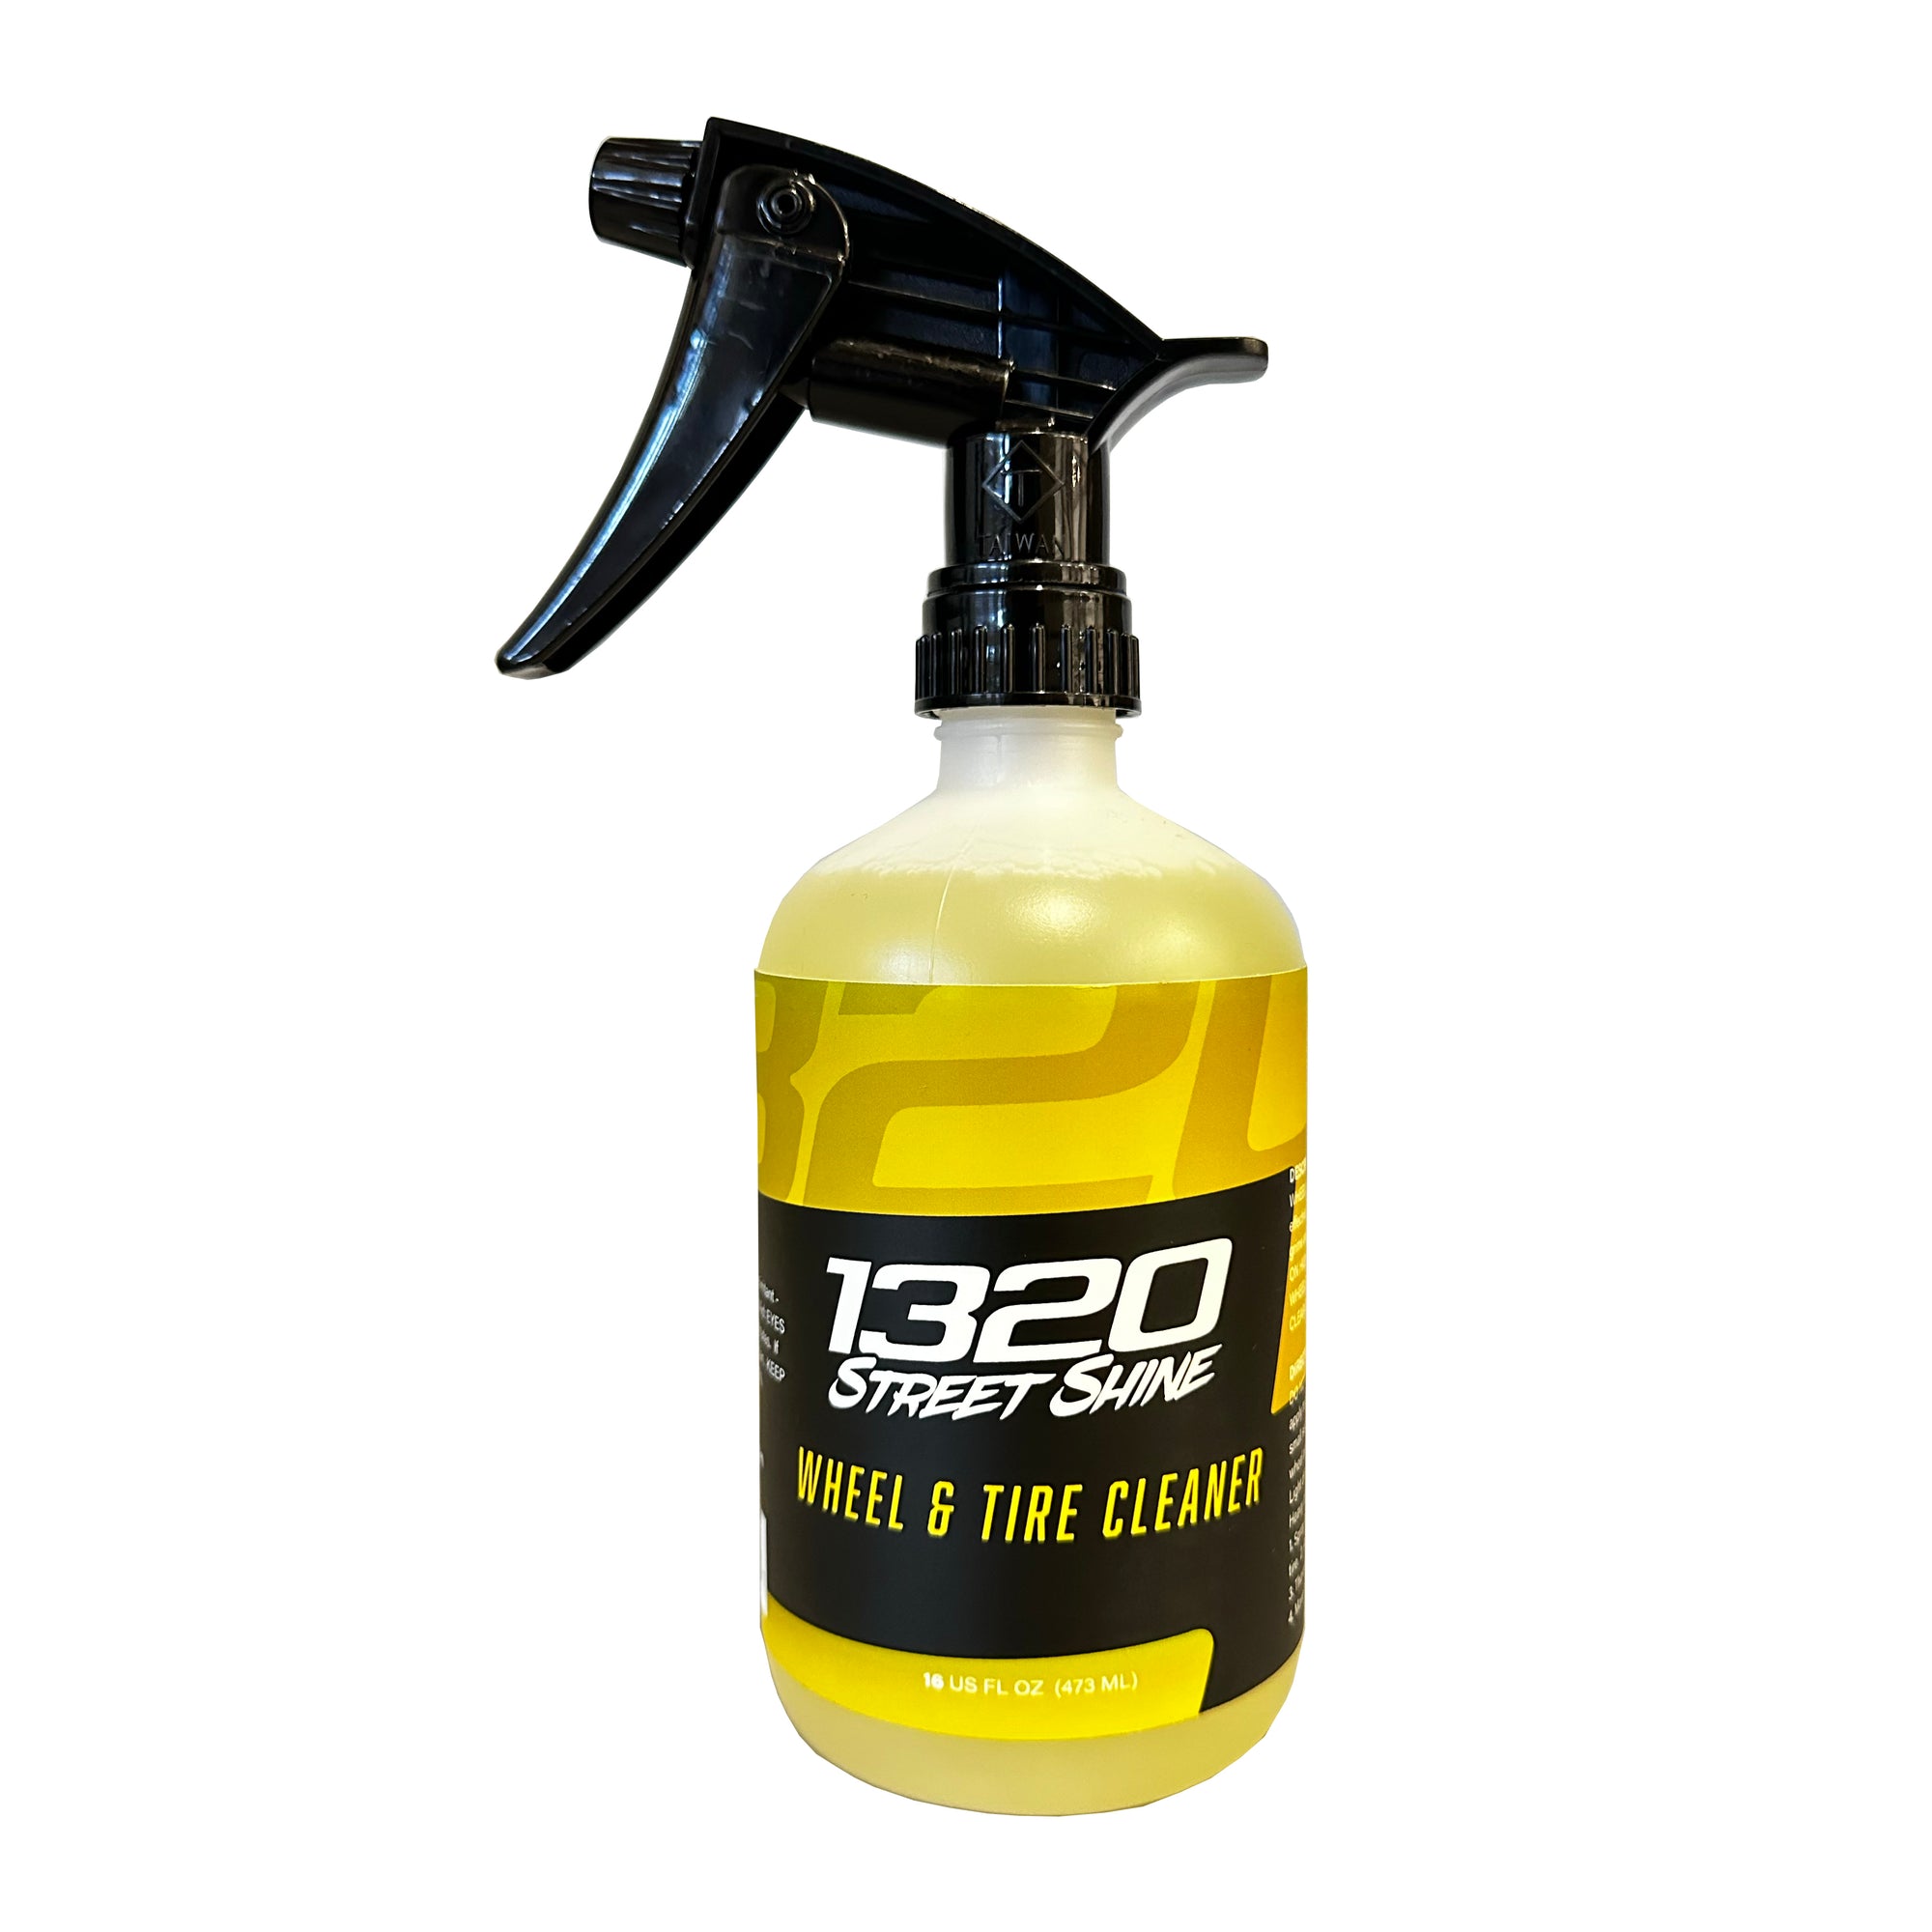 Time 2 Shine Wheel and Tire Cleaner - Go Shine On